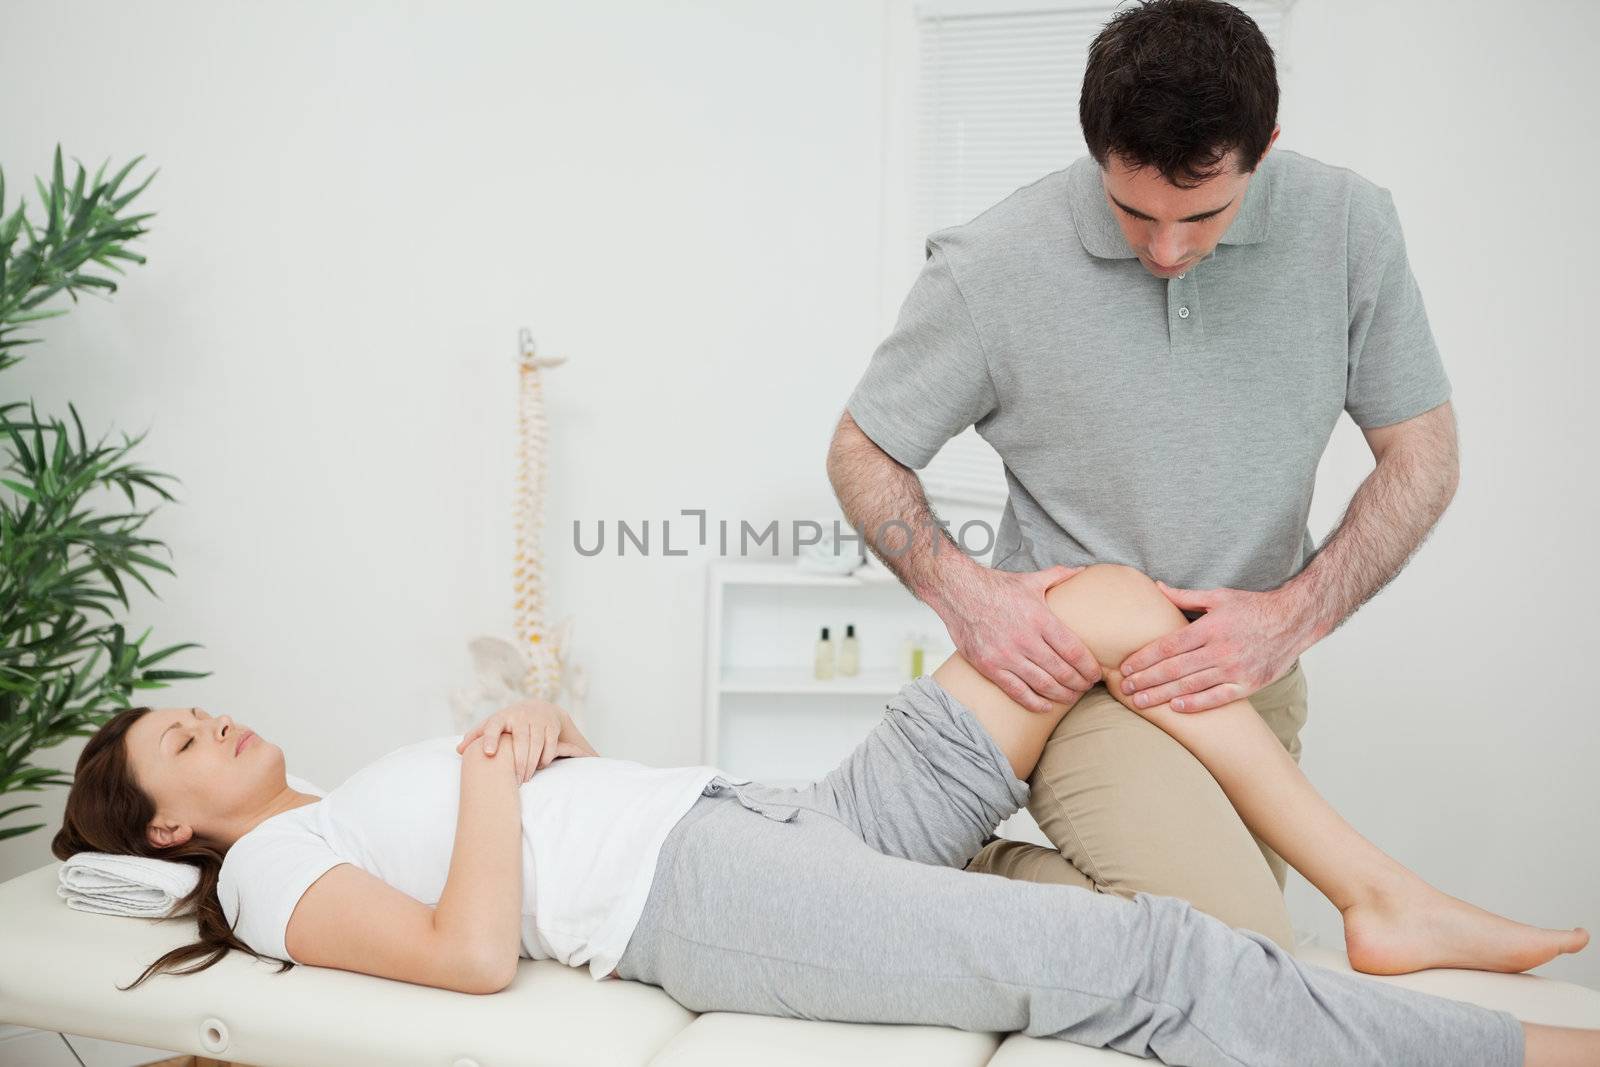 Black-haired osteopath touching the knee of a patient in a room